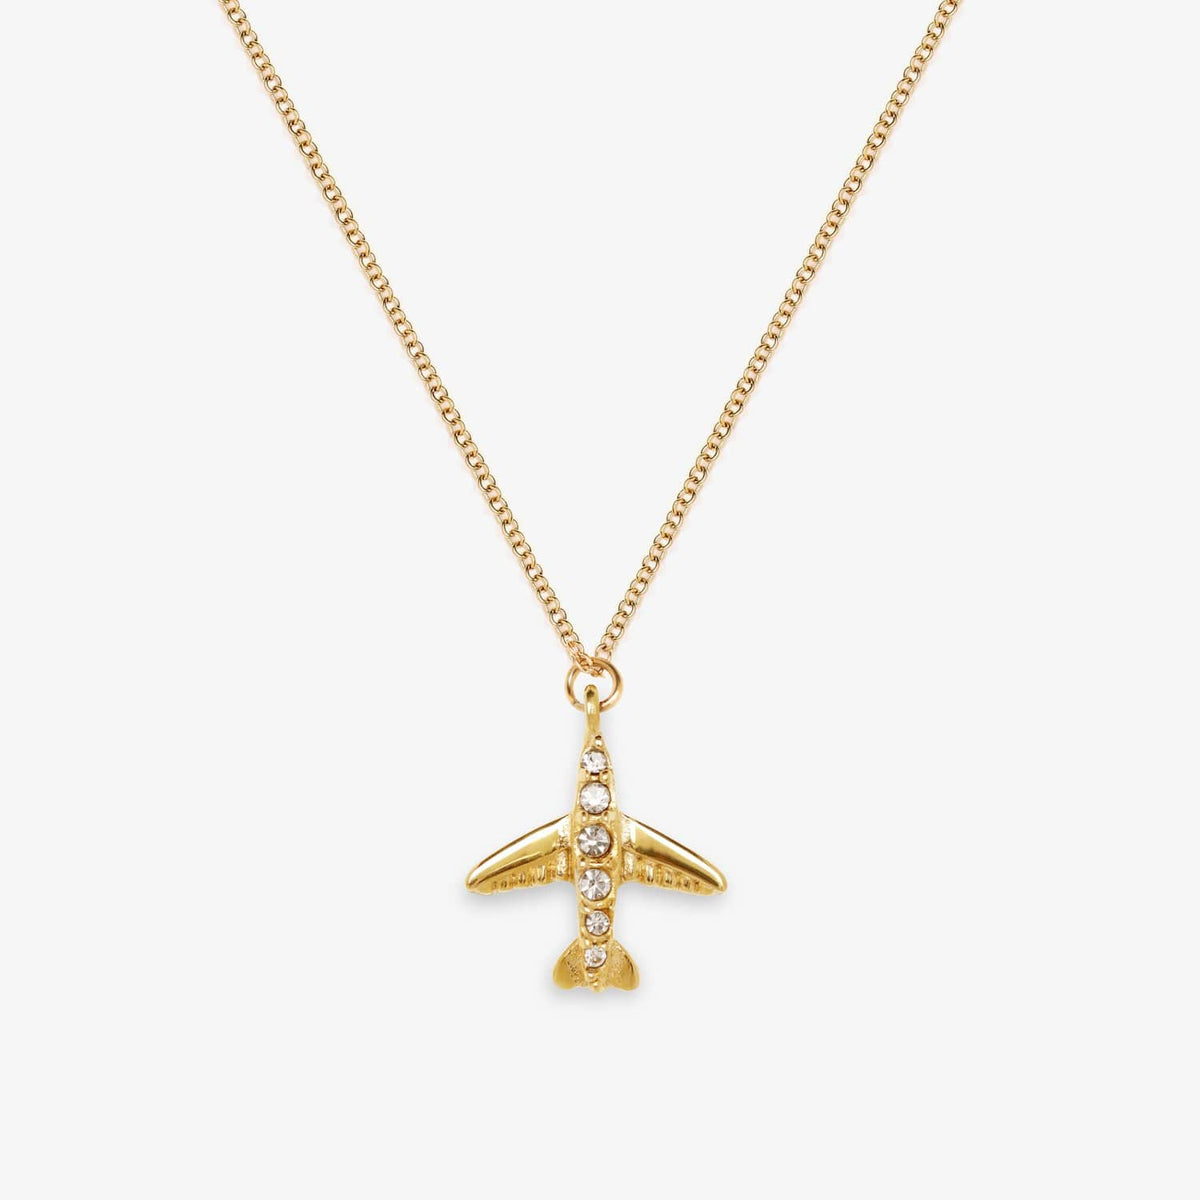 Buy Airplane Charm Necklace, Gold Tiny Airplane Necklace, Dainty Necklace,  Minimalist Necklace,birthday Gift Online in India - Etsy